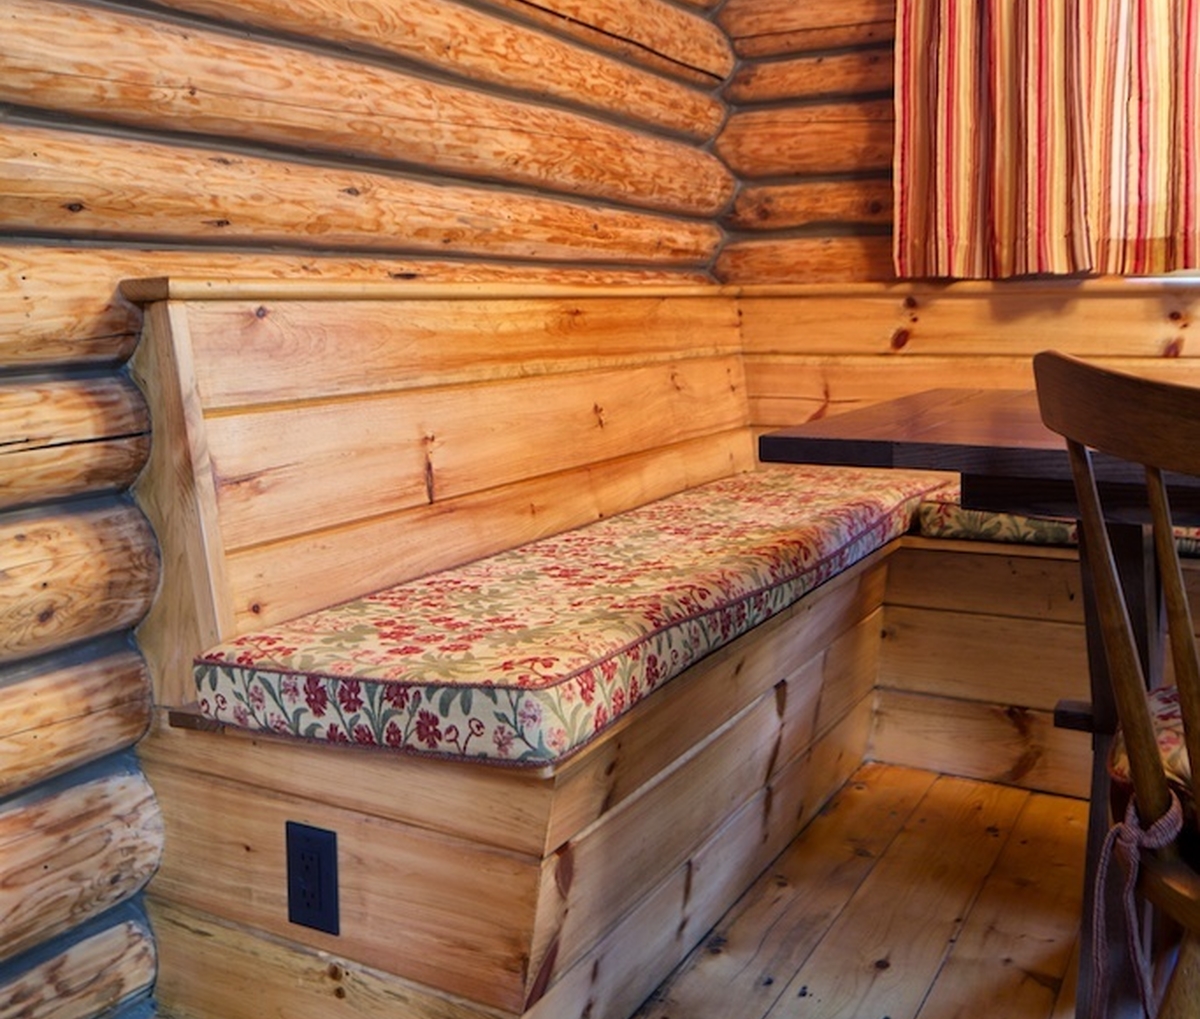 Built-in dining banquette in a log cabin